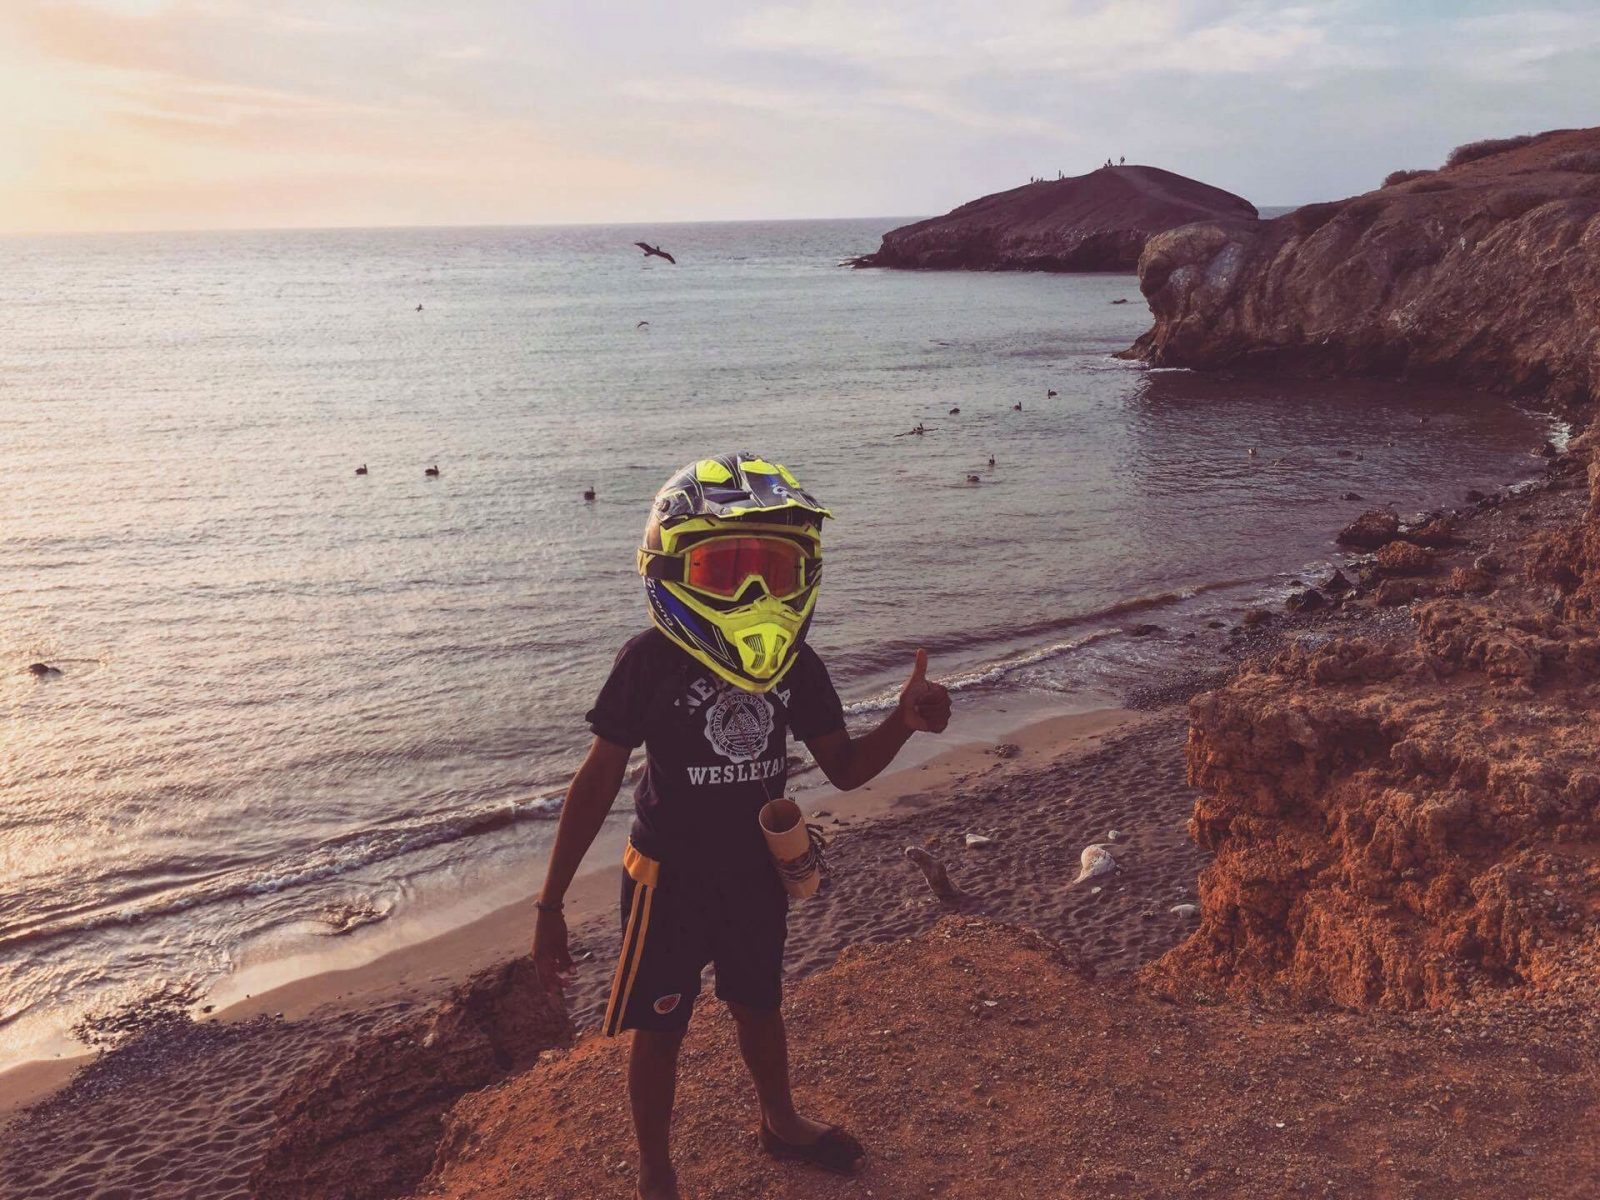 <img src="images/" width="800" height="600" alt="mystery baby - img 1117 - MysteryBaby: Punta Gallinas On a Dirtbike.">